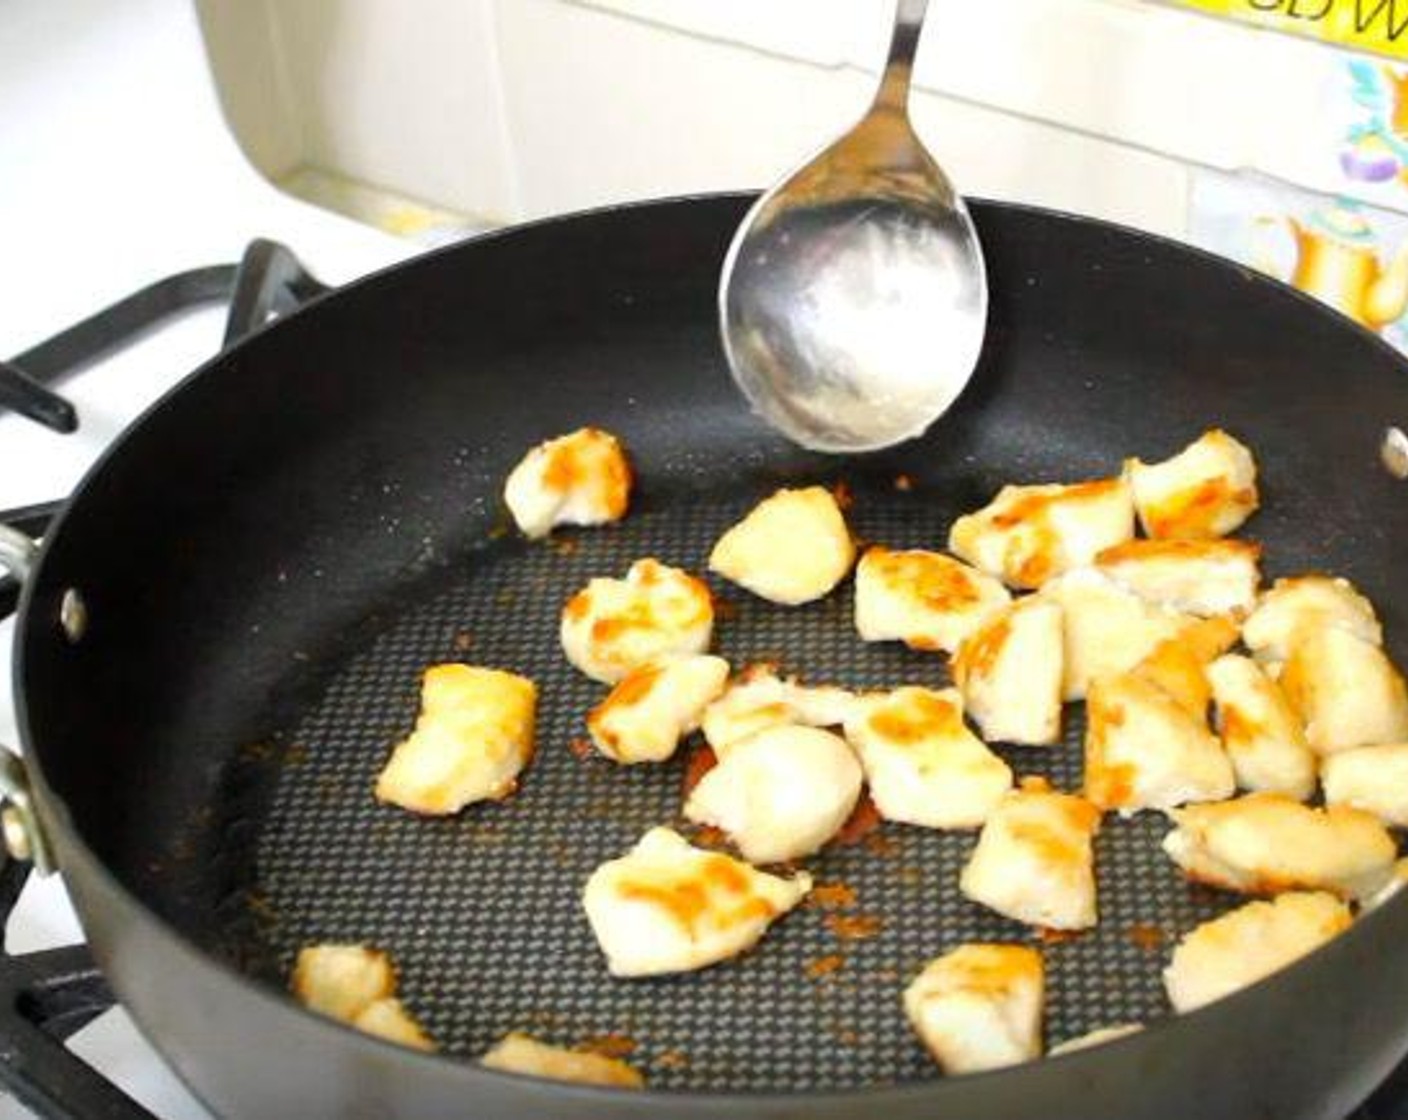 step 2 In a frying pan over medium-high heat, warm Oil (1/4 cup). Add chicken to the pan and cook for 5 minutes, or until browned.